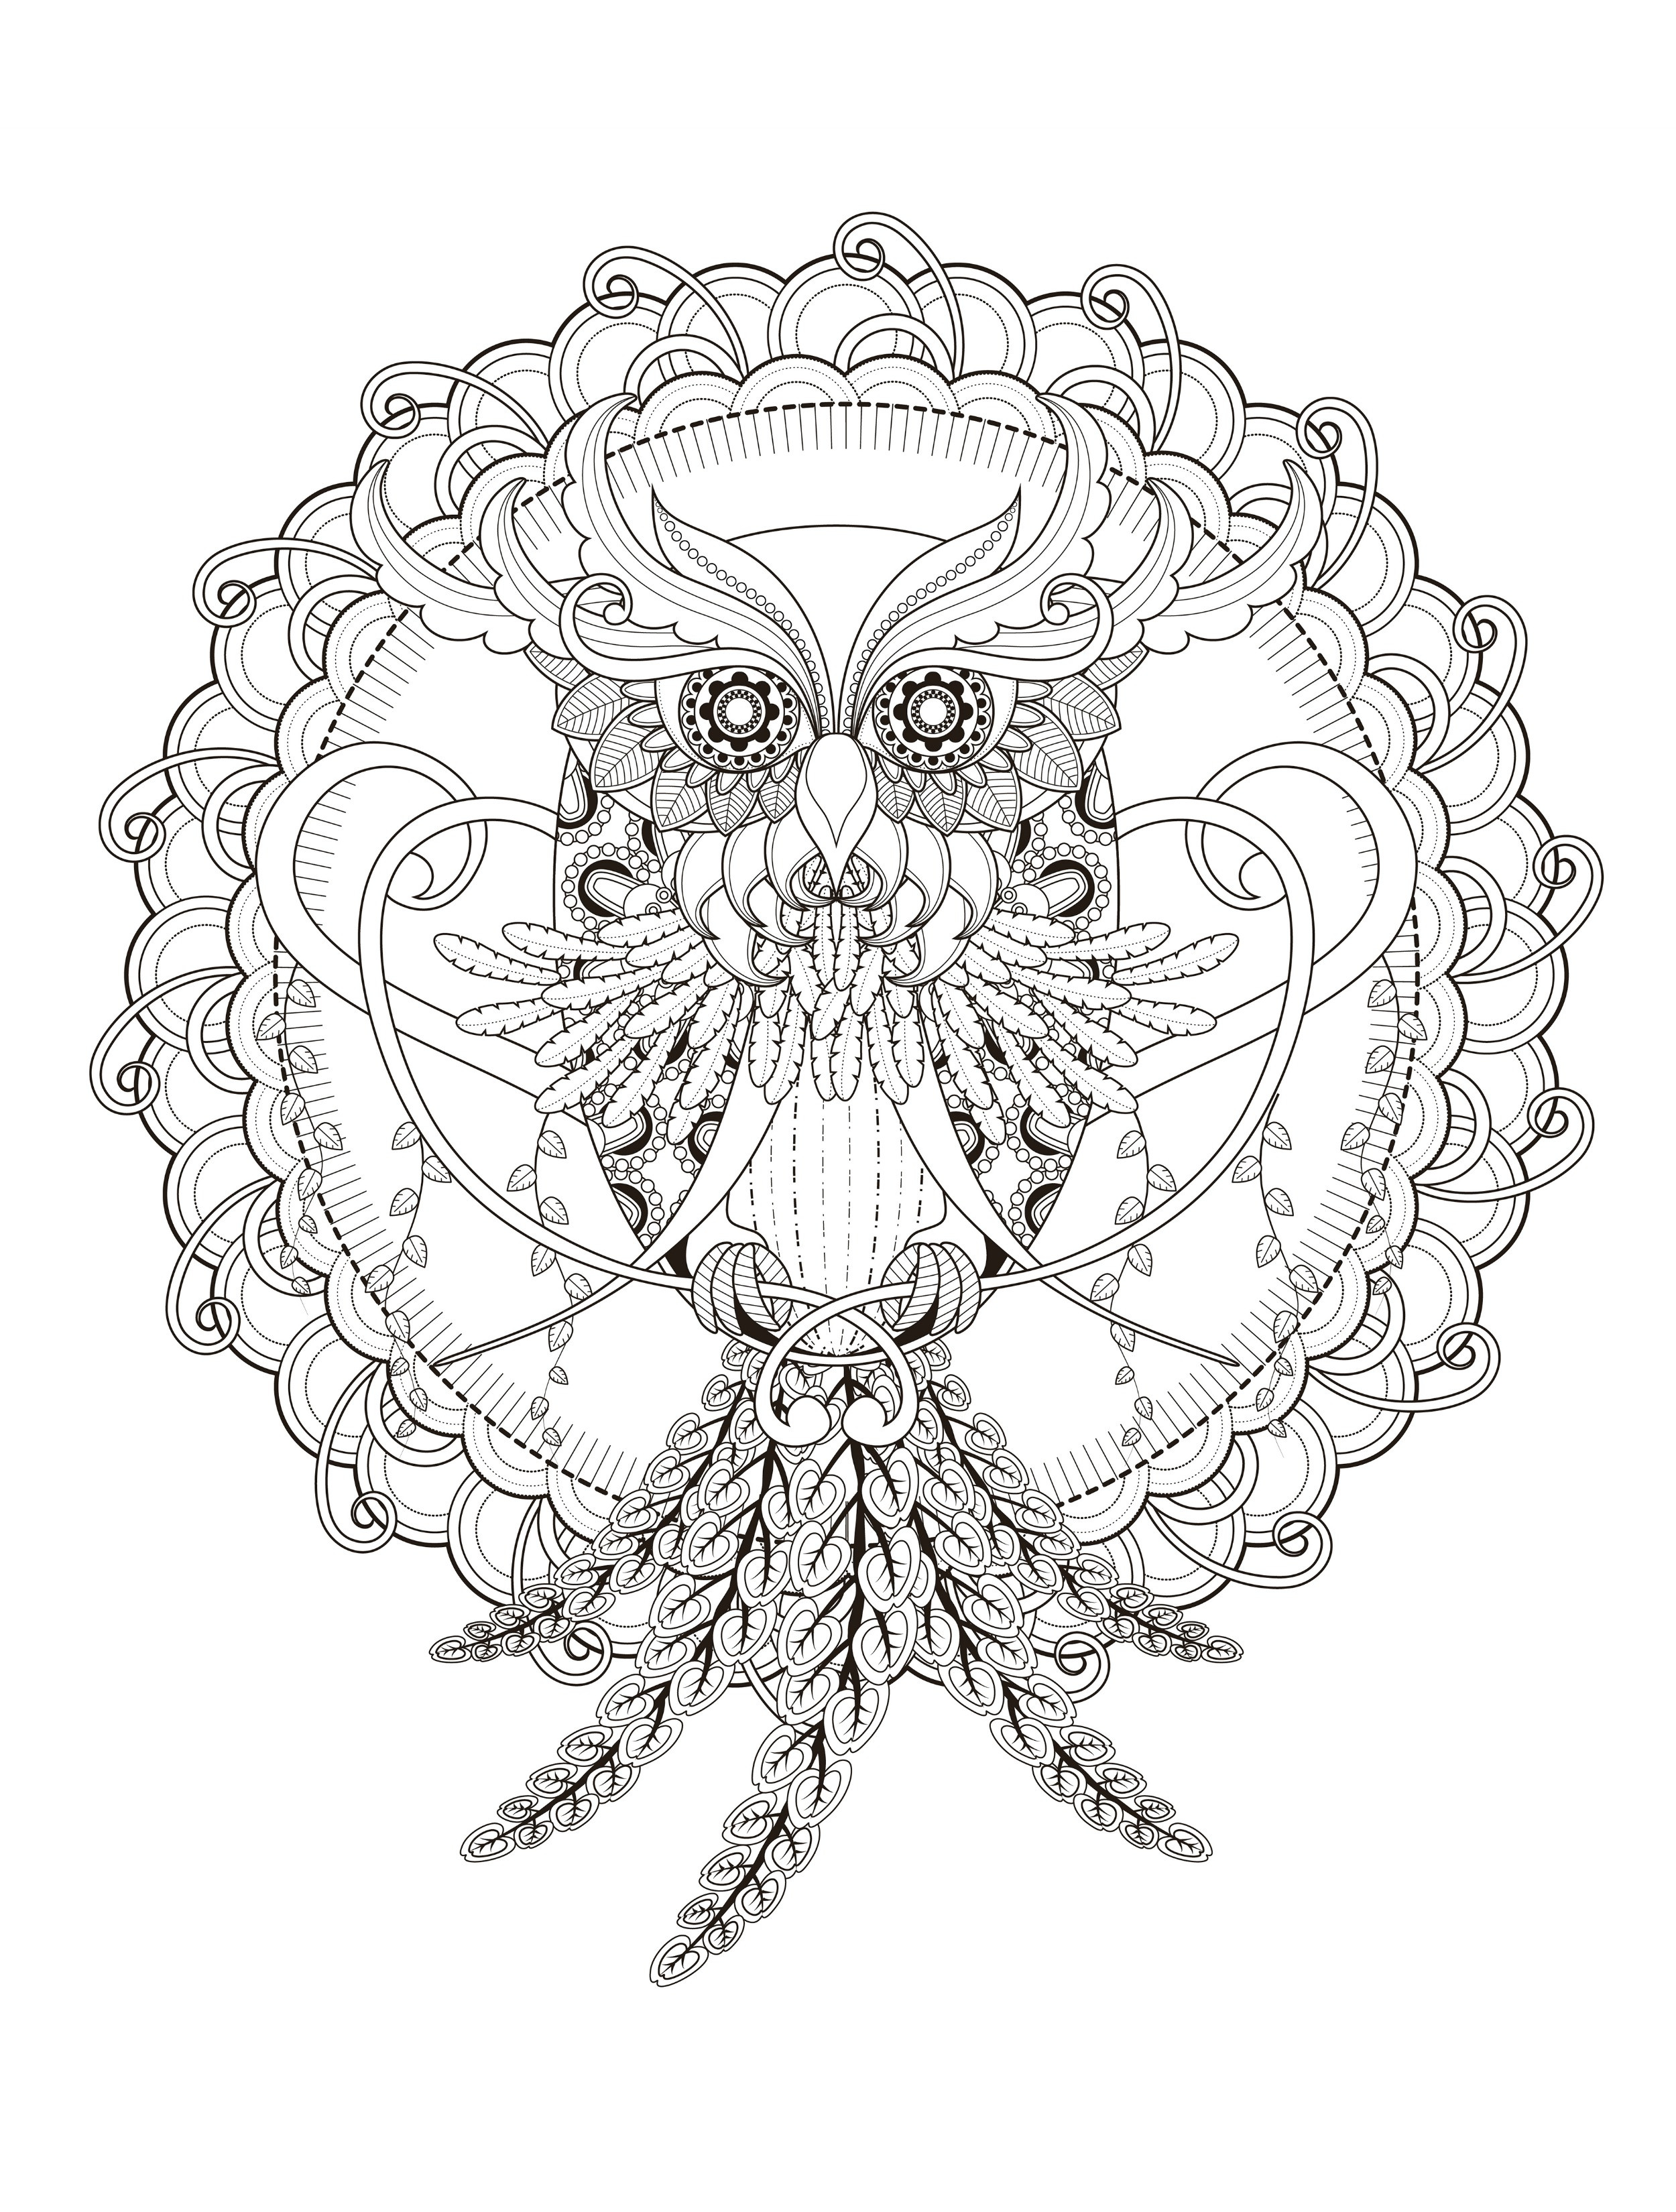 Adult Coloring Book Images
 OWL Coloring Pages for Adults Free Detailed Owl Coloring